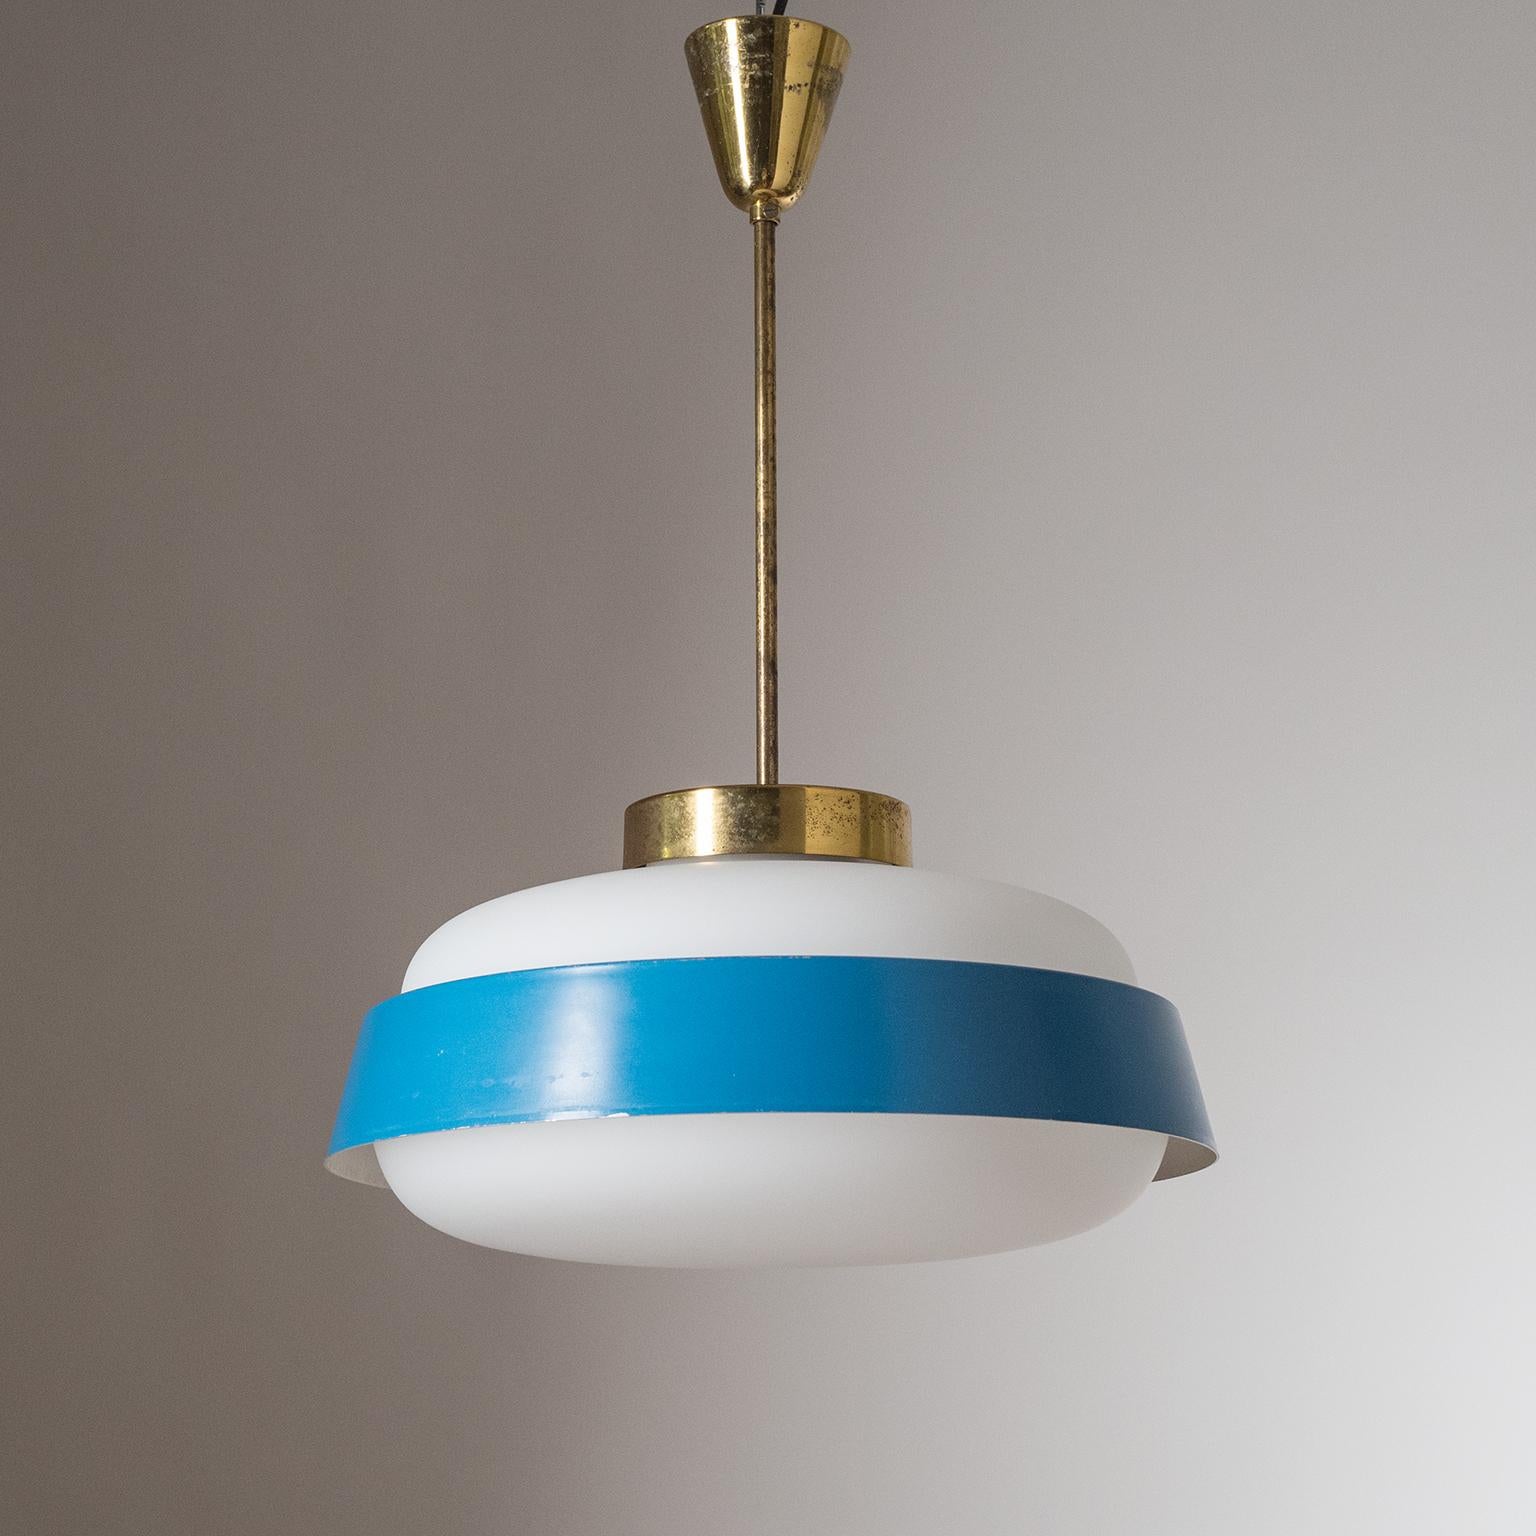 Fine Italian ceiling light from the 1950-1960s. A large satin glass diffuser with a blue lacquered 'Saturn' shade suspended by brass hardware. Good original condition with partially heavy patina on the brass. One E27 socket with new wiring.